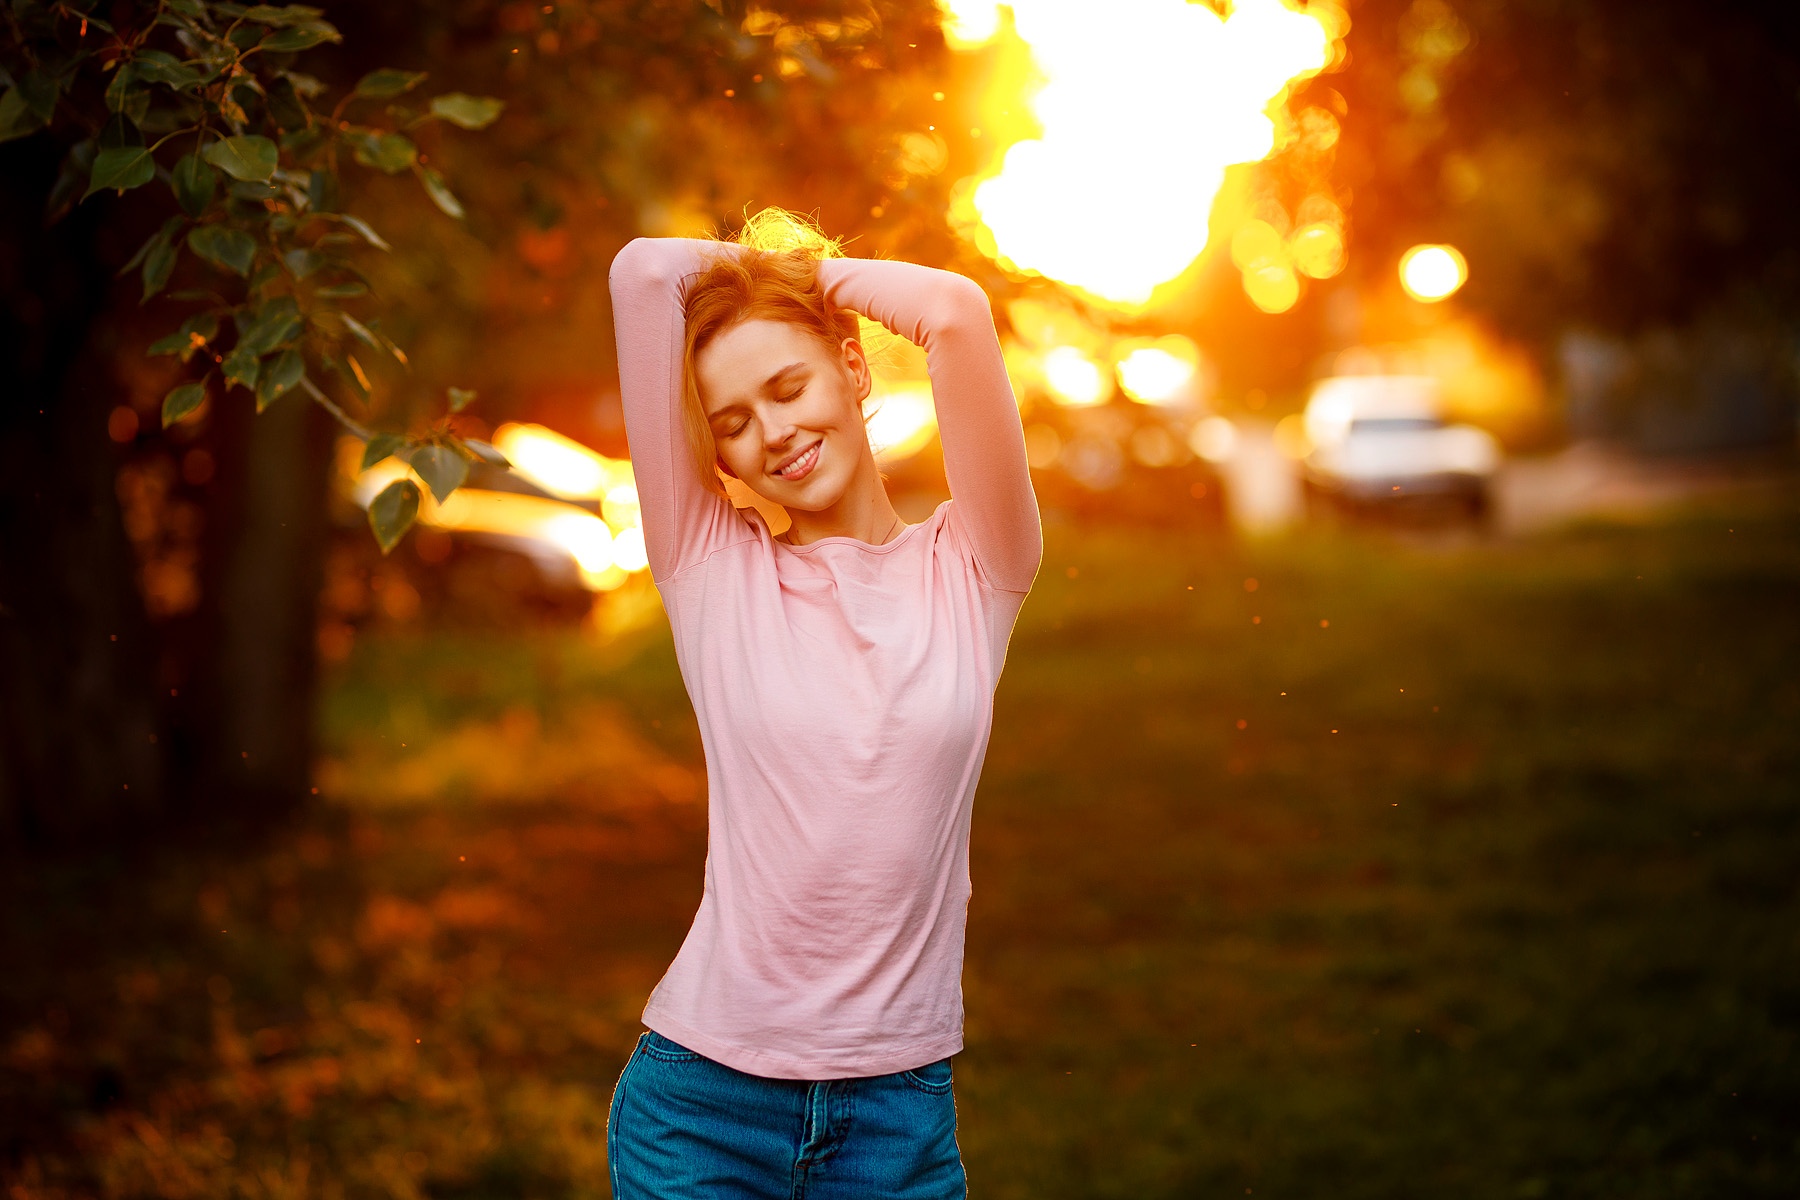 Maria Amelina Women Model Blonde Hands On Head Closed Eyes Smiling Pink Tops Jeans Bokeh Sunset Lens 1800x1200